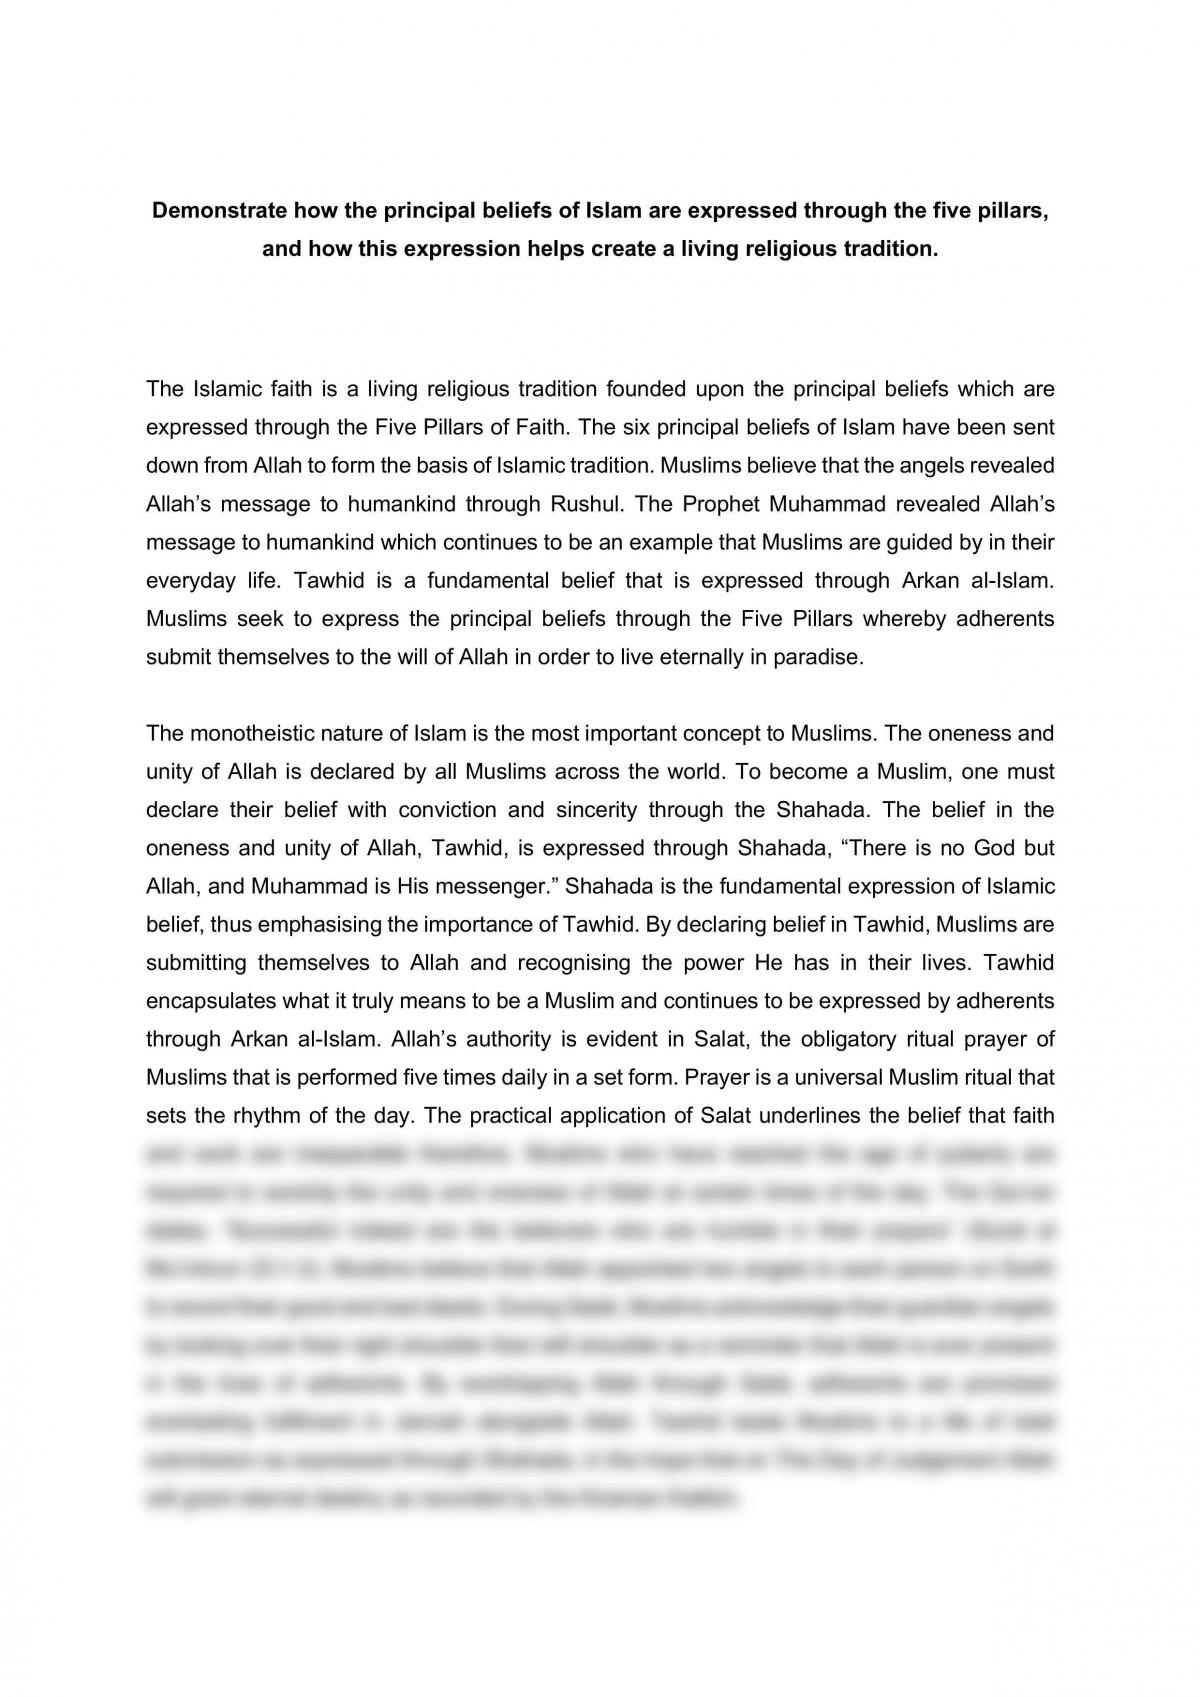 essay on personality in islam